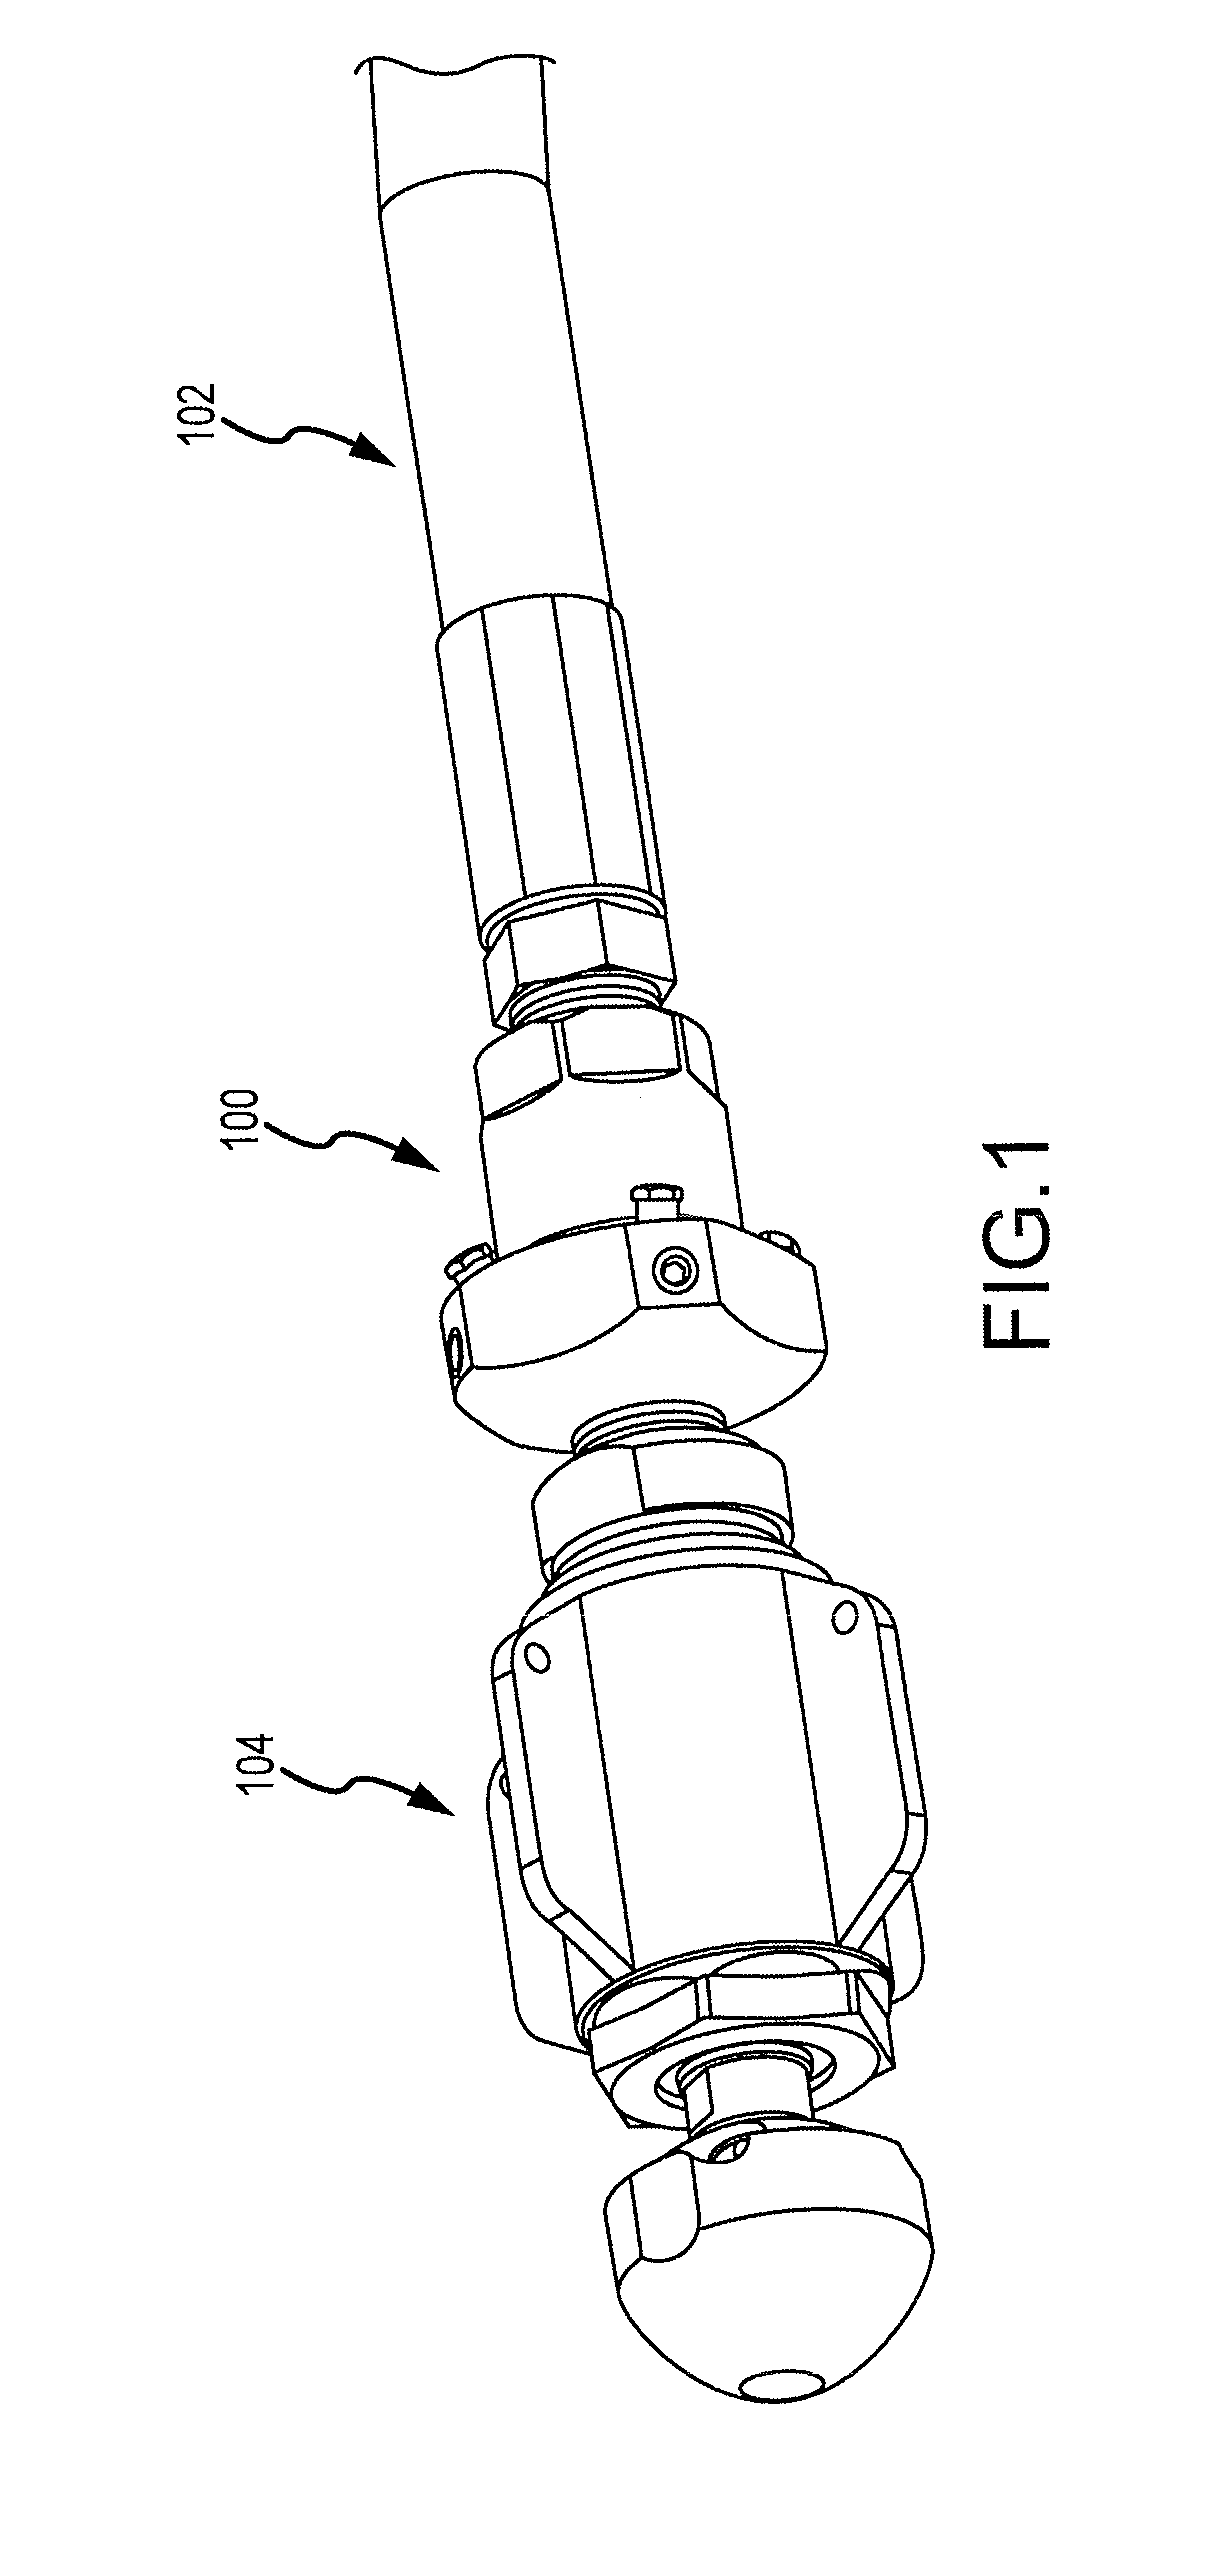 Flow controlled switching valve